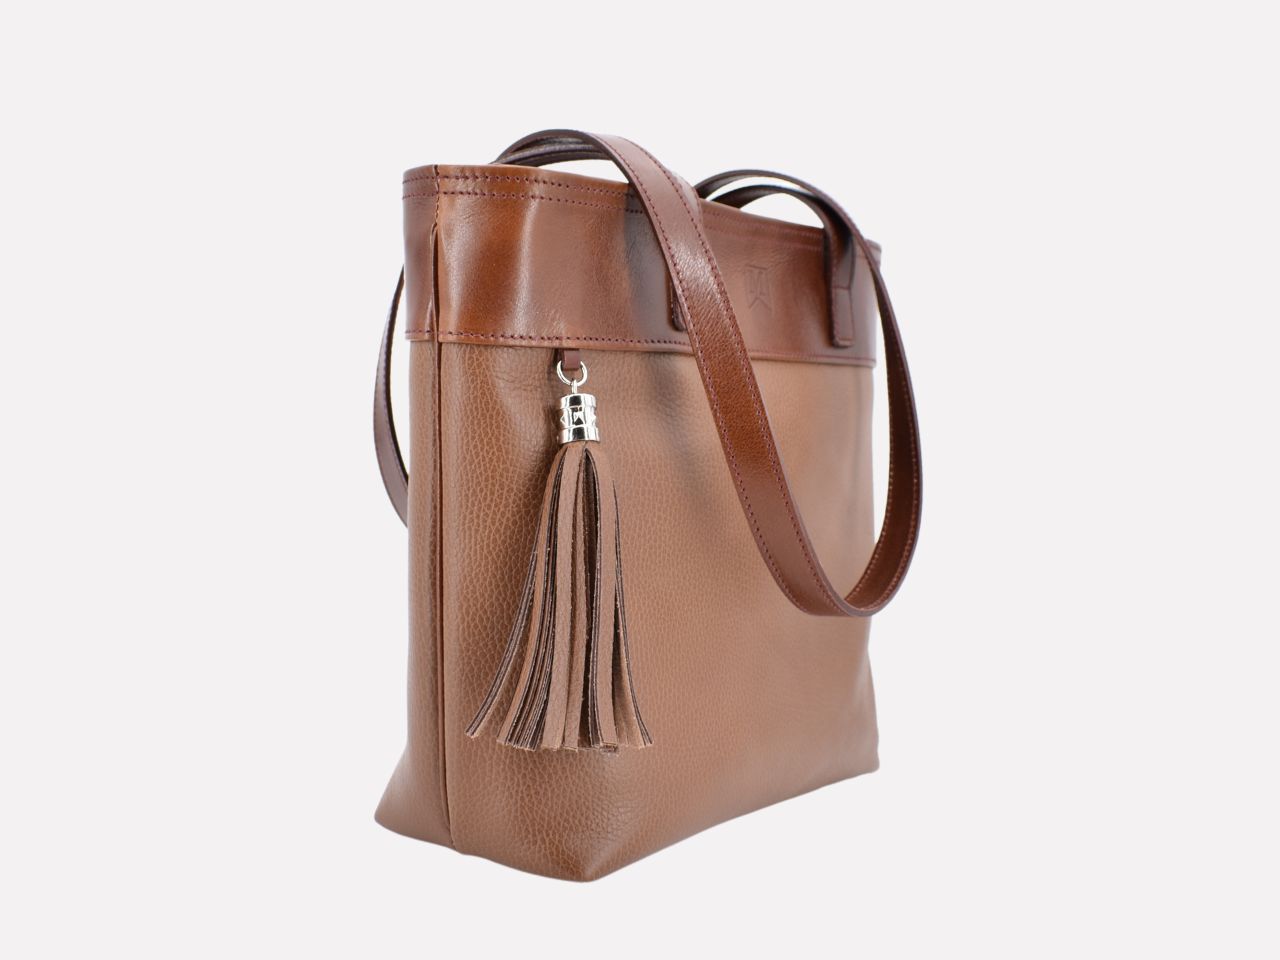 Sors, Italian leather tote bag designed and handcrafted by Riccardo Mancini